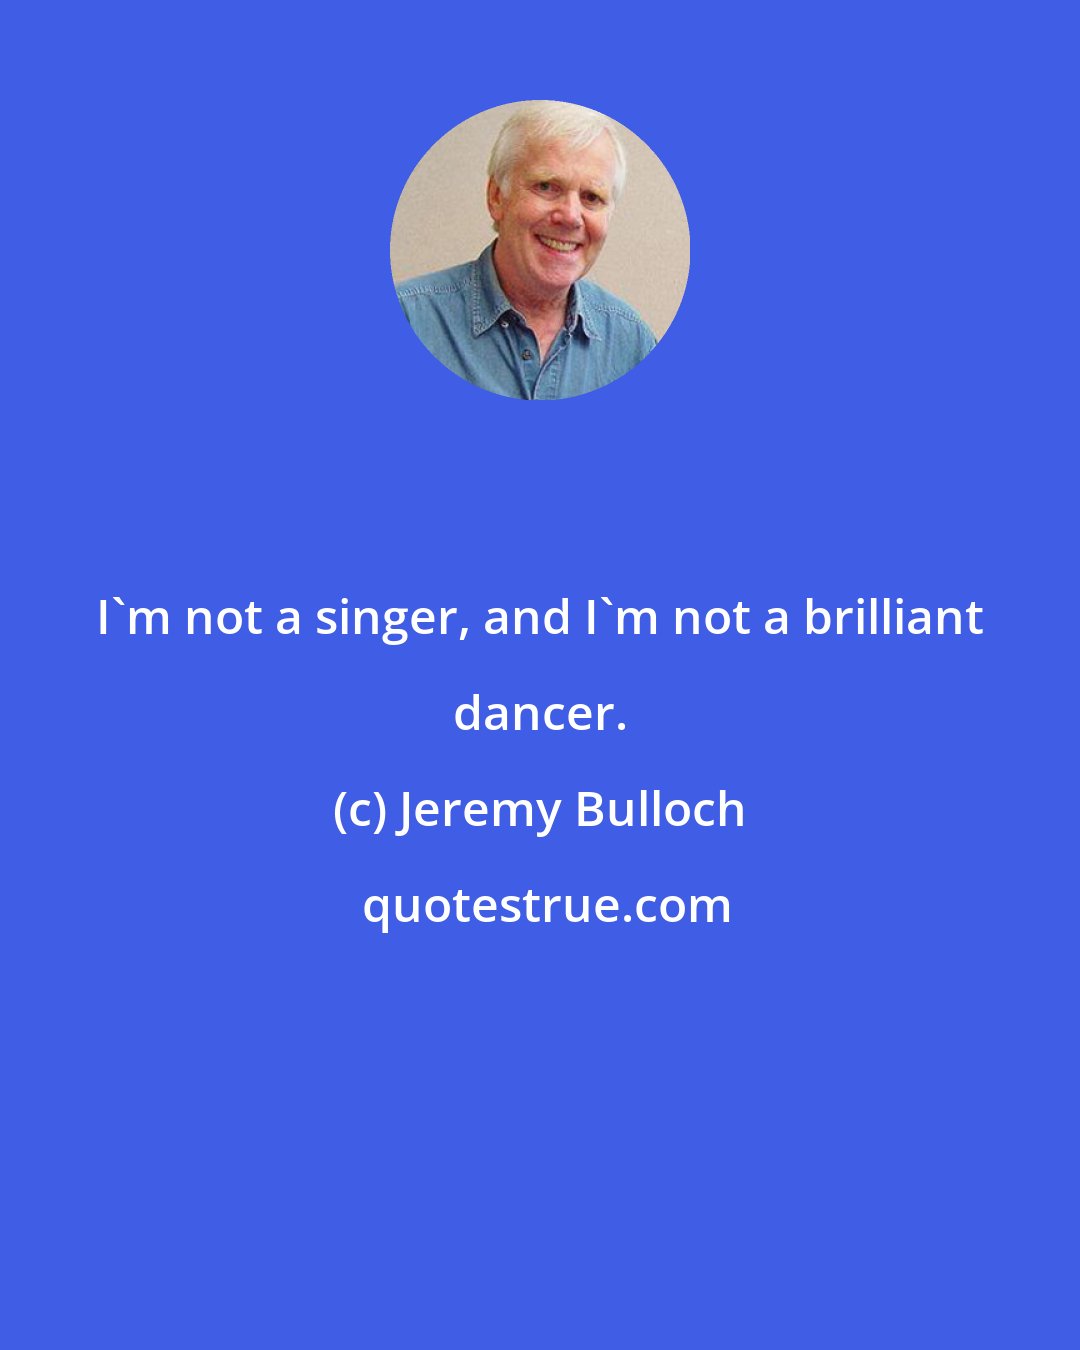 Jeremy Bulloch: I'm not a singer, and I'm not a brilliant dancer.